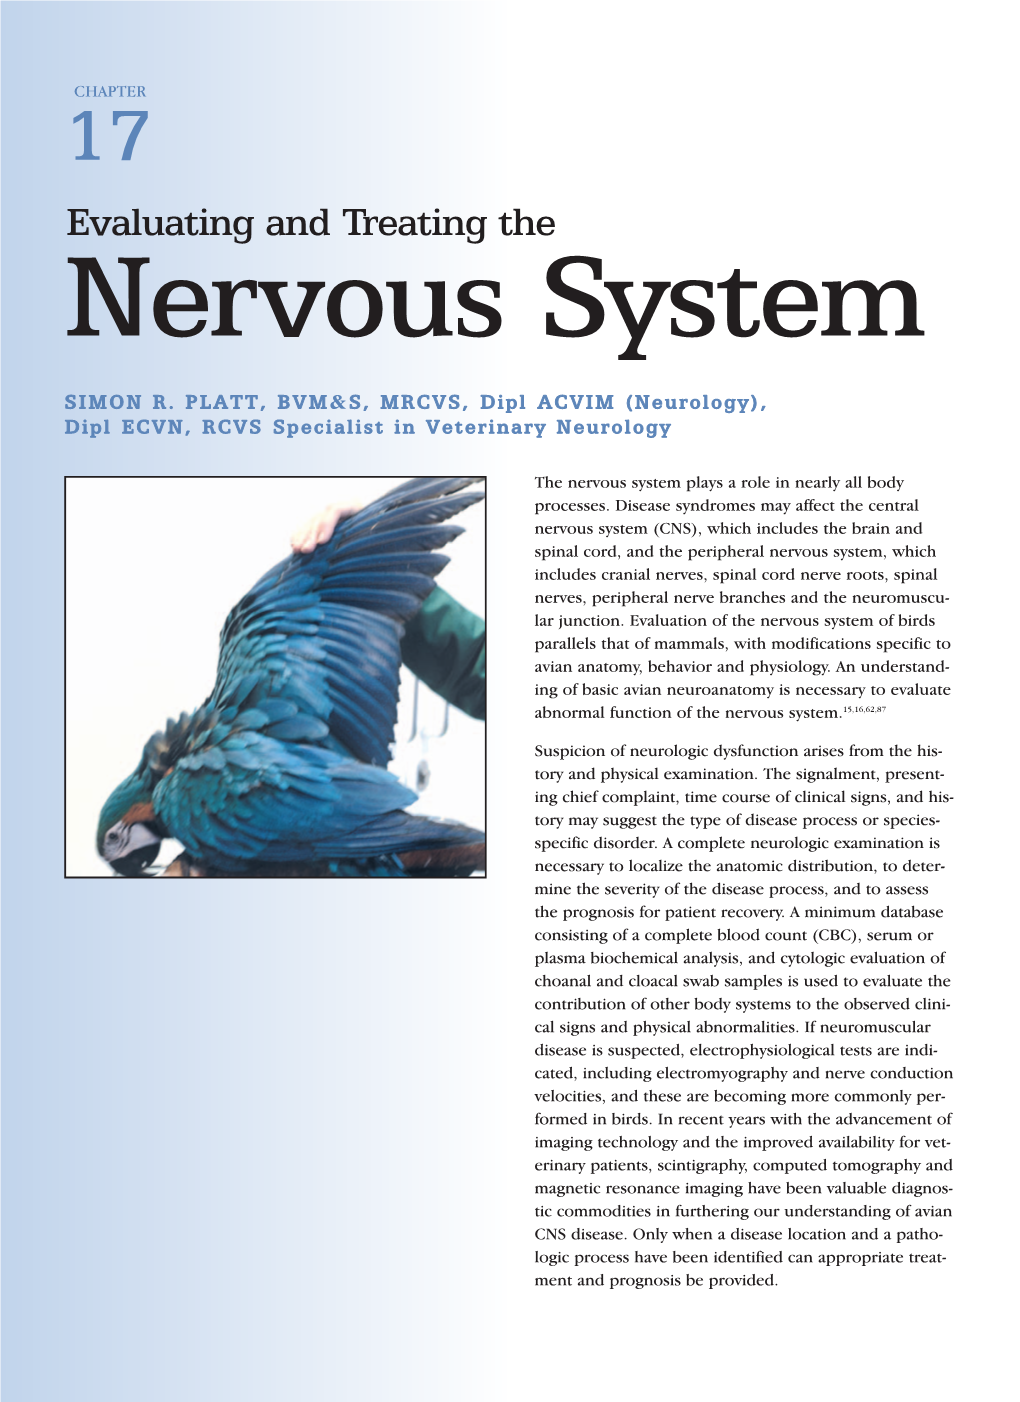 Evaluating and Treating the Nervous System